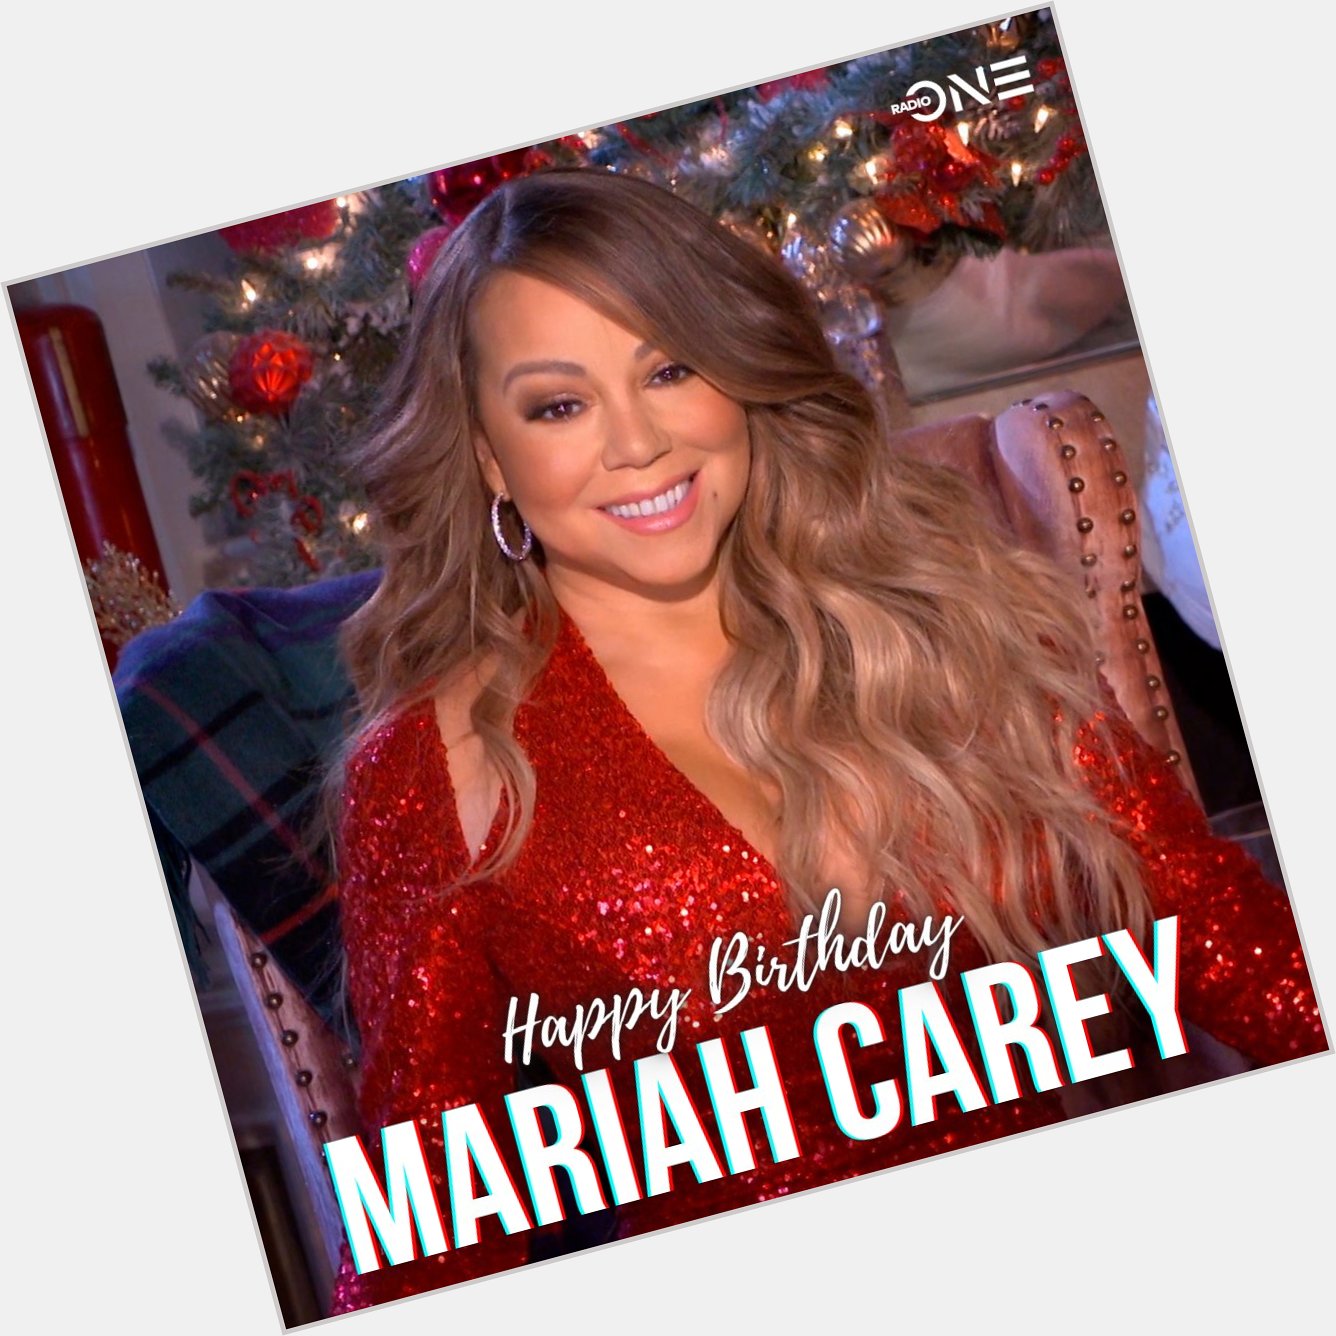 Happy birthday to one of the GOATs, Mariah Carey!  